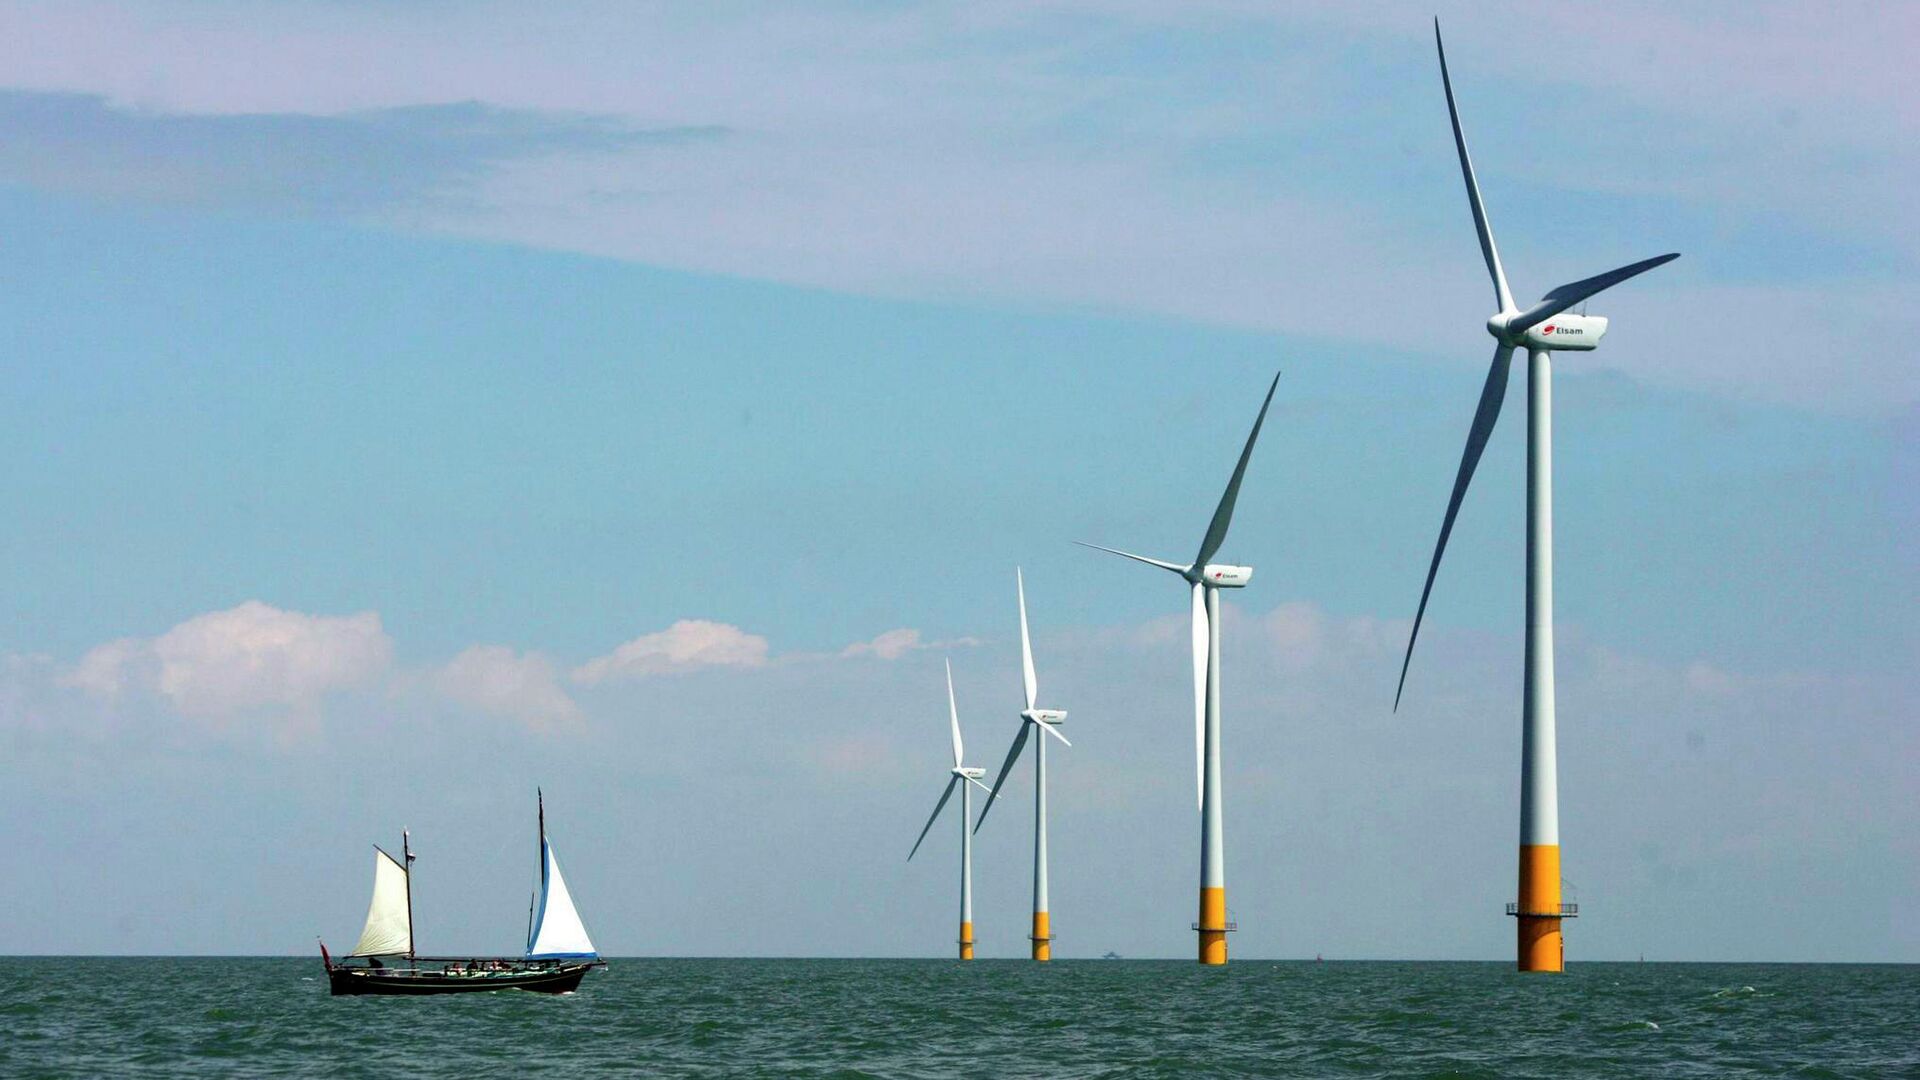 FILE - In this July 11, 2006 file photo, a vessel sails towards a wind farm off the coast of Whitstable on the north Kent coast in southeastern England - Sputnik International, 1920, 19.05.2022